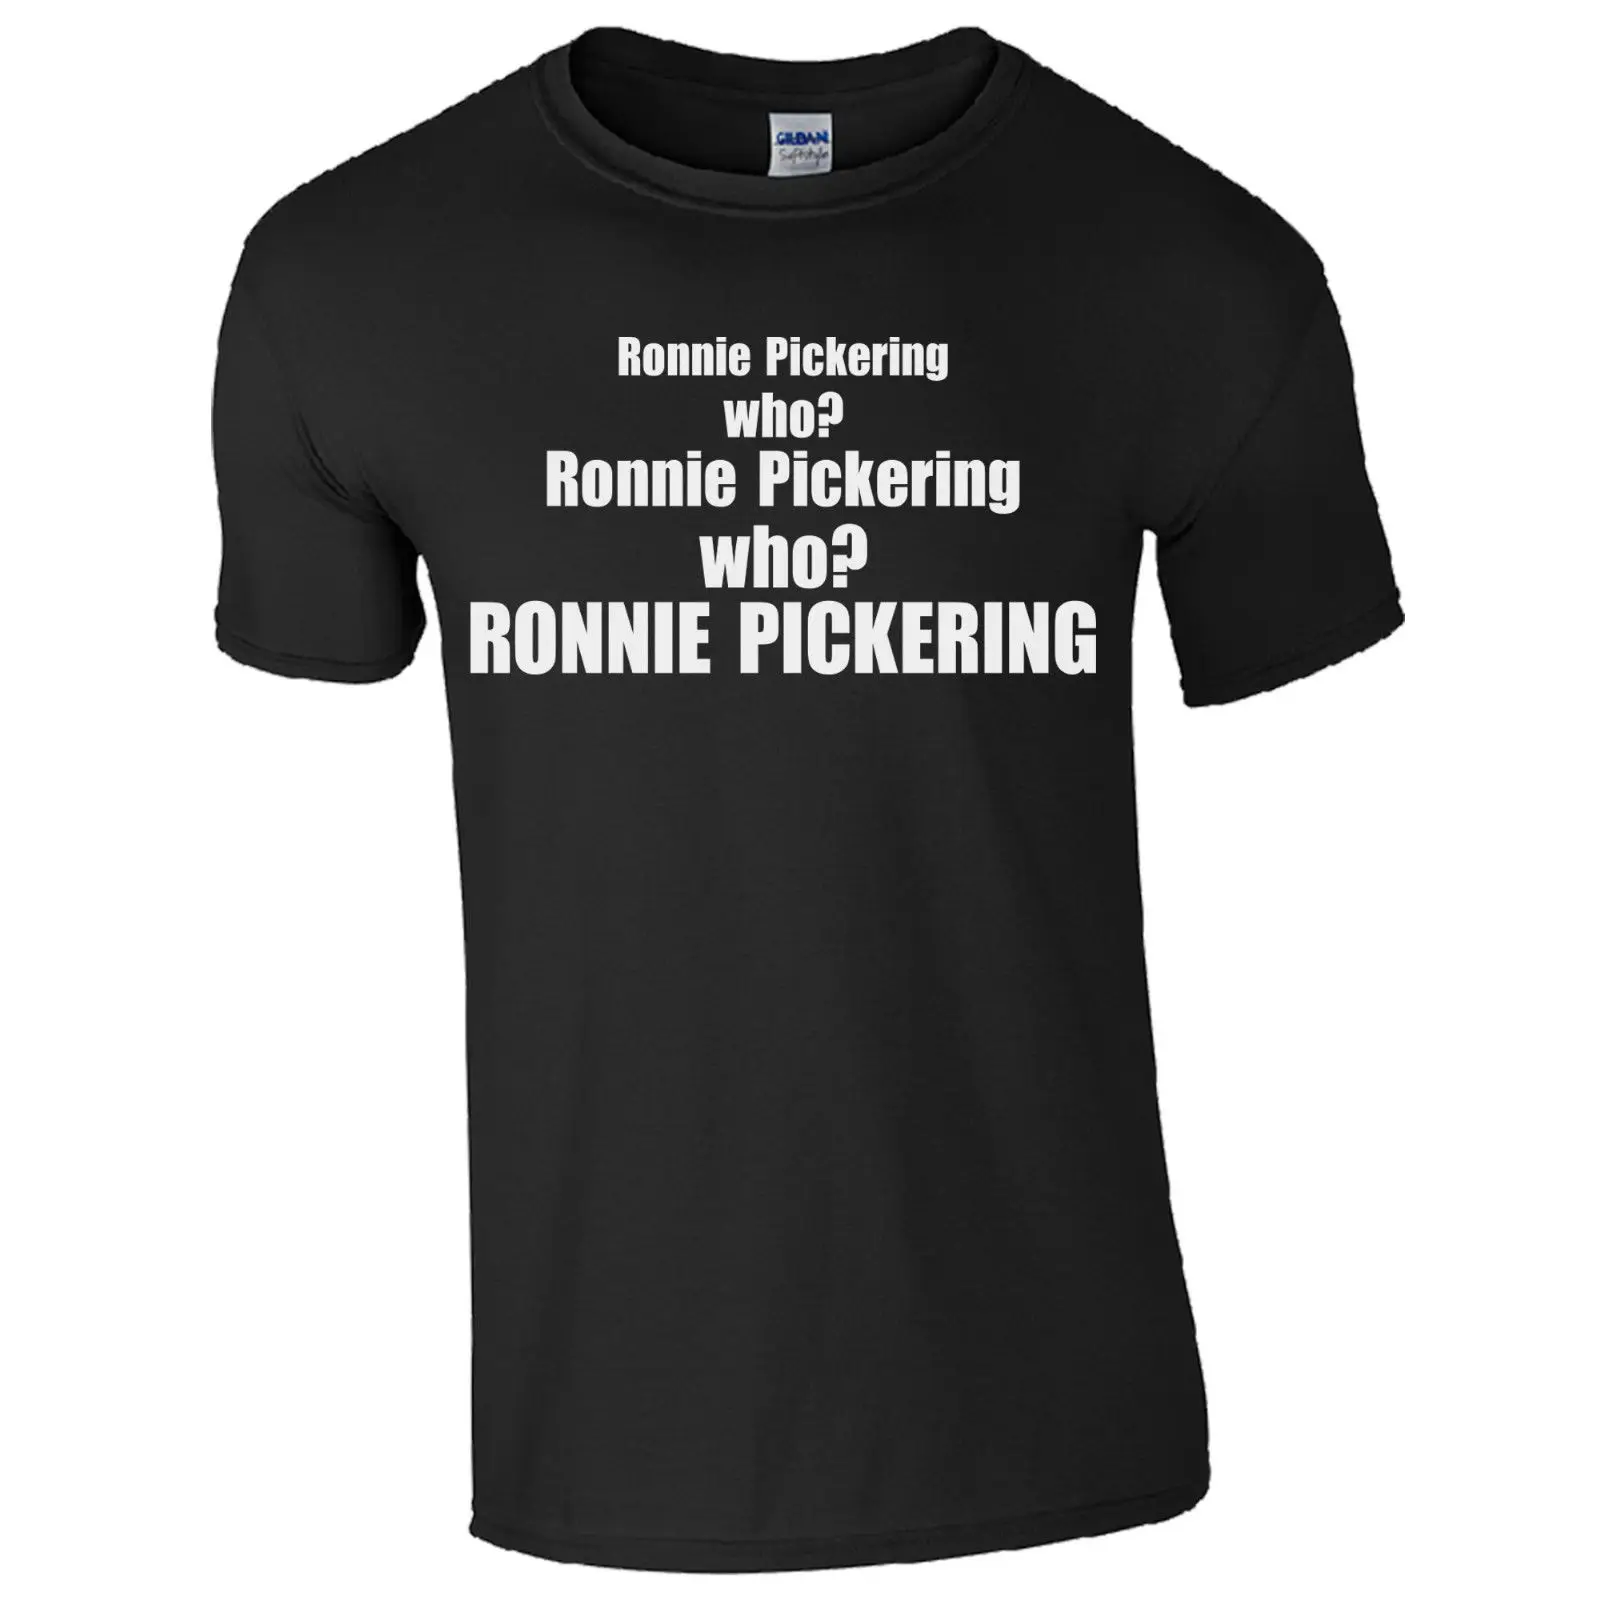 Ronnie Pickering Who? T-shirt Funny Youtube Vine Video Parody Remix Mens  Top - T-shirts - AliExpress